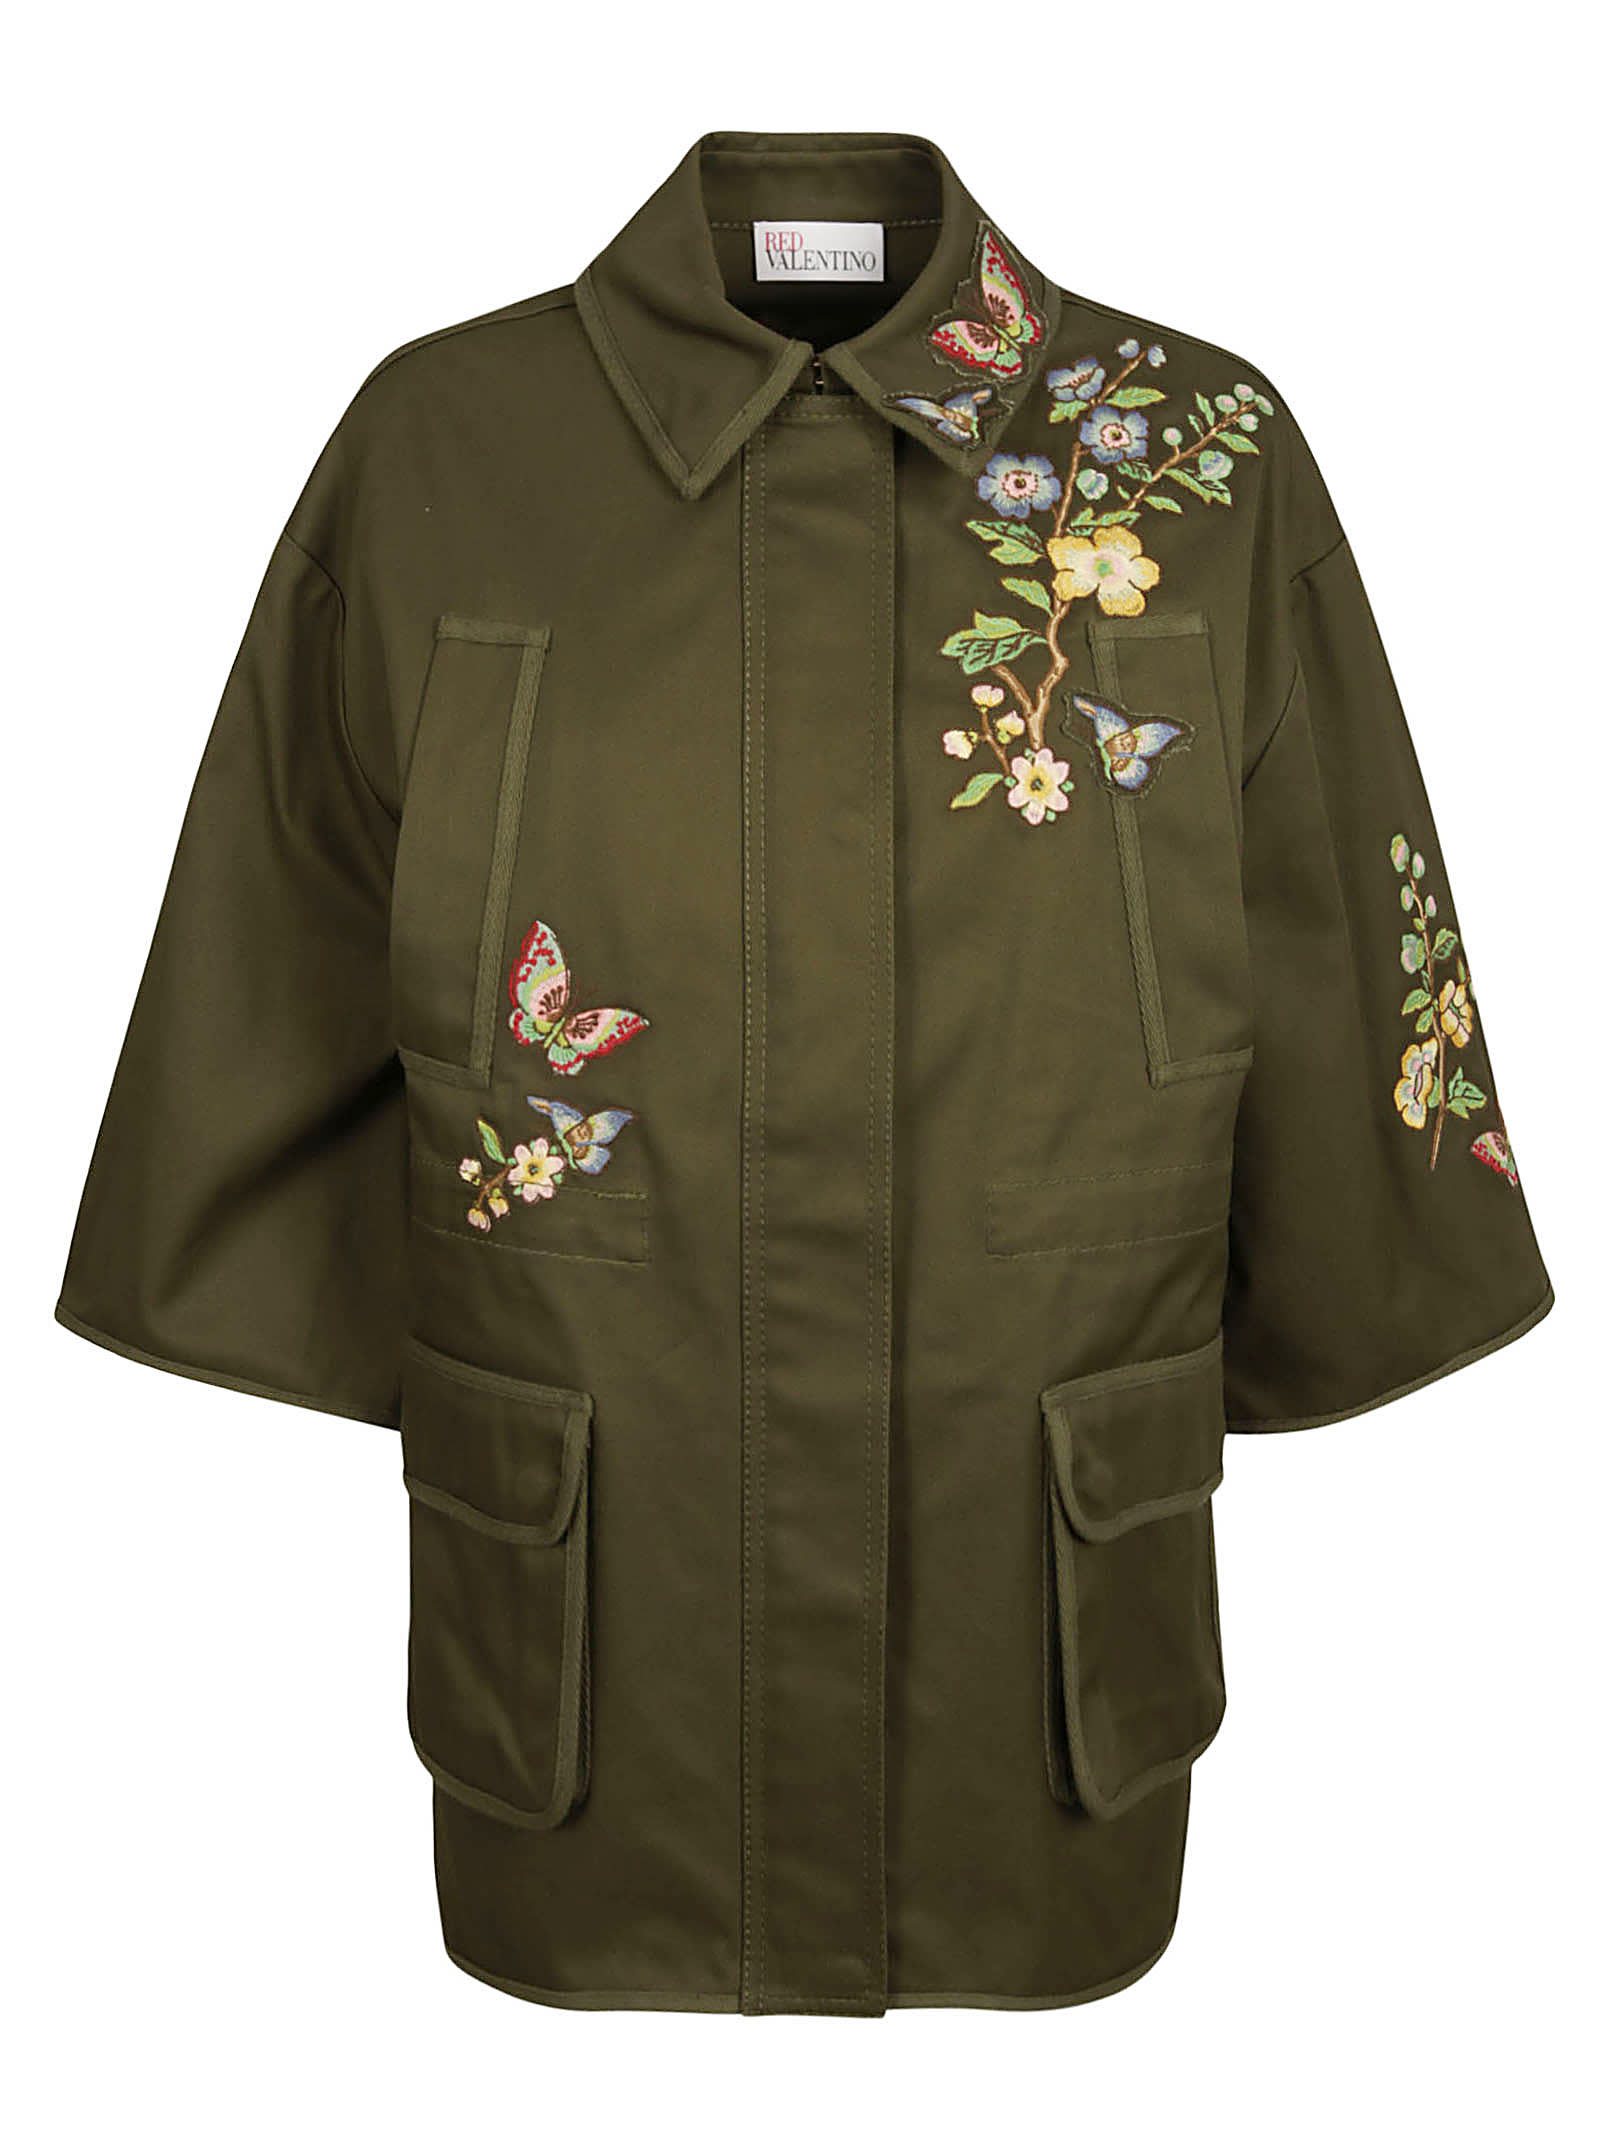 RED Valentino Floral Patched Army Jacket